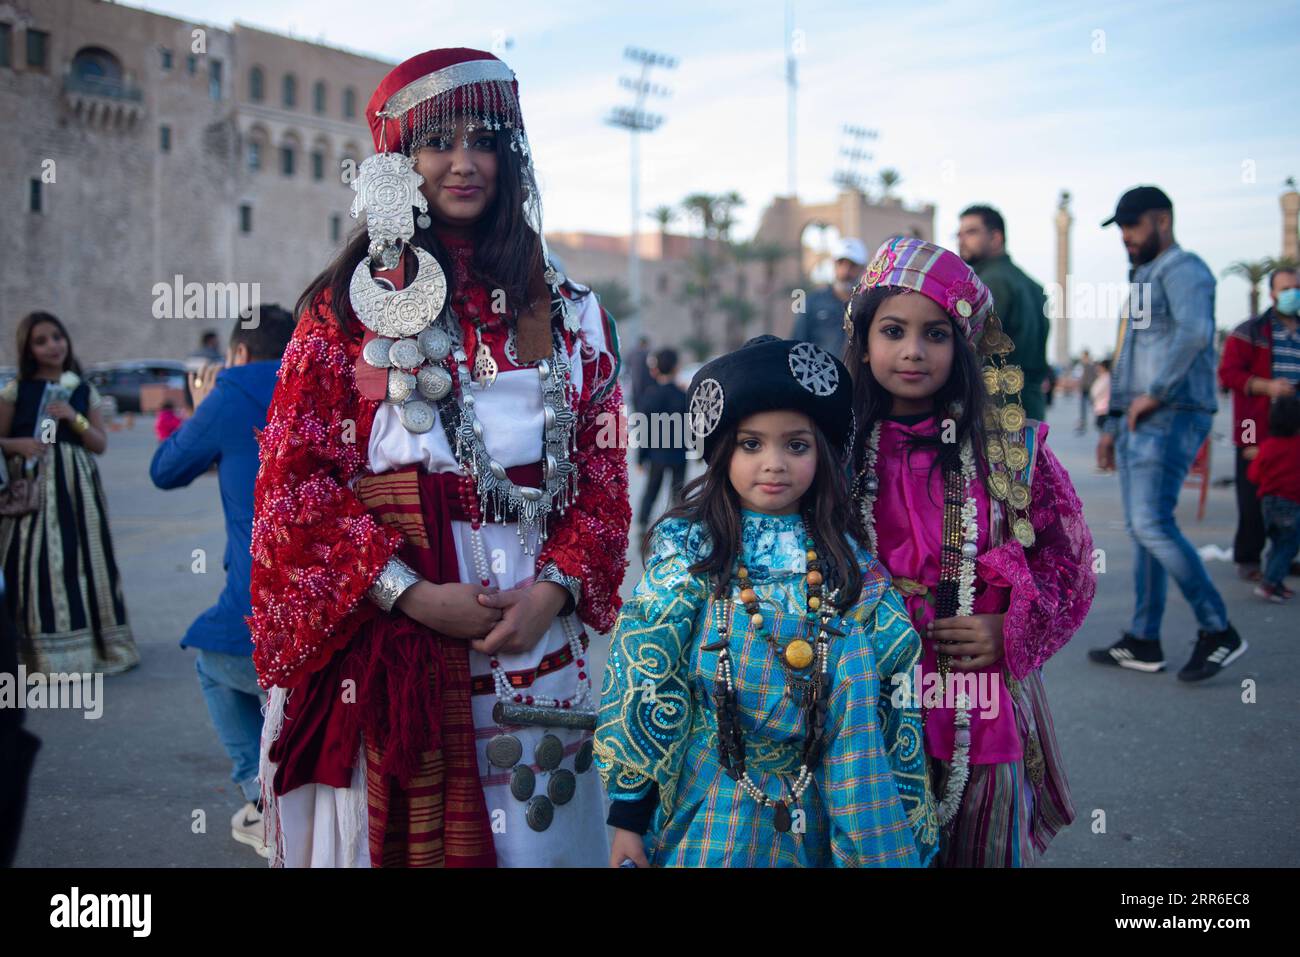 210209 -- TRIPOLI, Feb. 9, 2021 -- Libyan girls in traditional dresses pose for a photo at the Martyr s Square in Tripoli, Libya on Feb. 4, 2021. As the 10th anniversary of the Libyan uprising that toppled late leader Muammar Gaddafi s regime approaches, Libyan analysts believe the war-torn country is facing a real chance for restoring political stability, especially with the recent creation of a new executive authority. Photo by /XinhuaTO GO WITH News Analysis: New authority expected to restore political stability in Libya on 10th uprising anniversary: analysts LIBYA-TRIPOLI-10TH UPRISING ANN Stock Photo